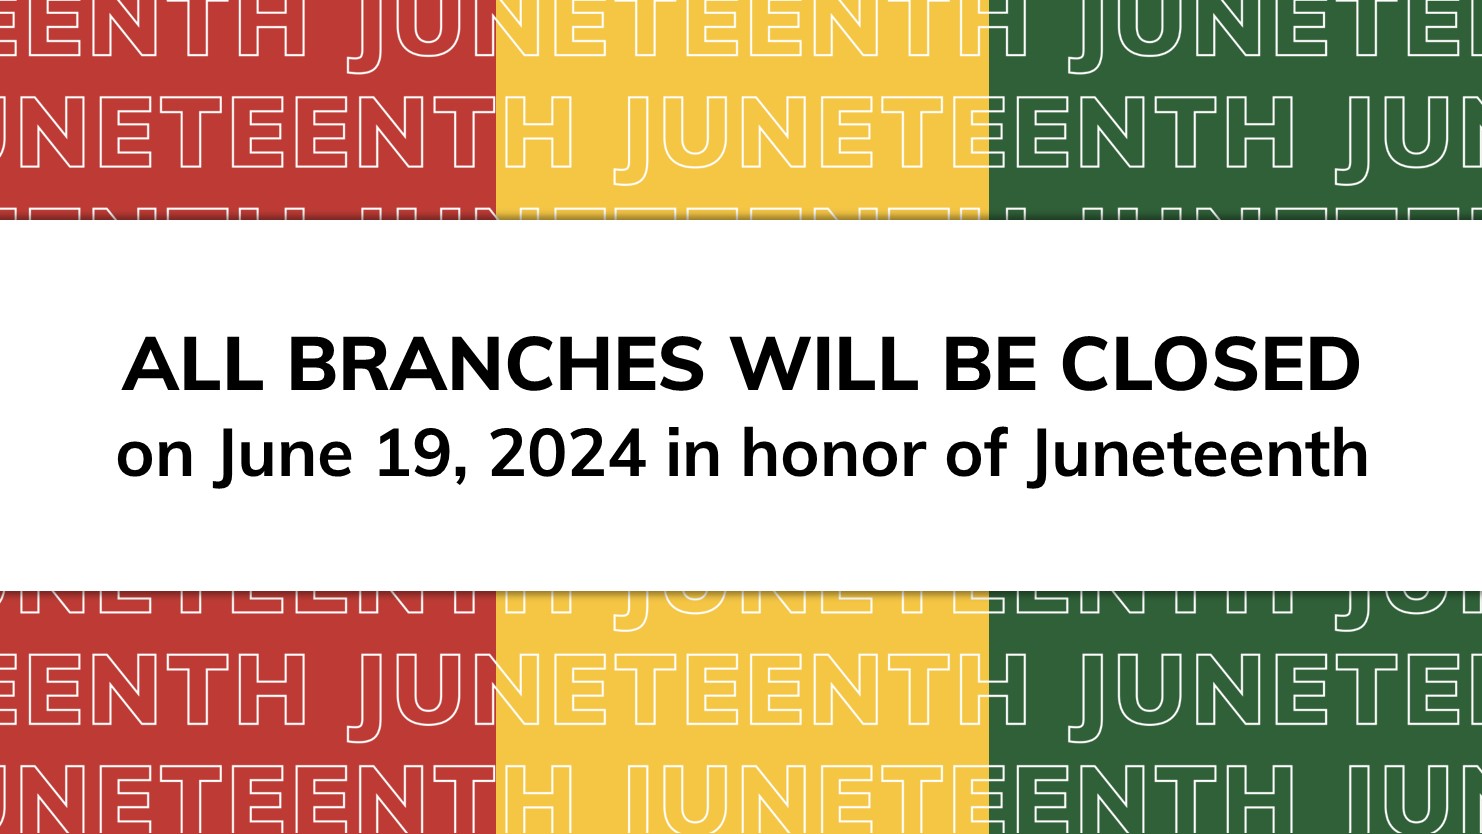 All branches will be closed on June 19, 2024 in honor of Juneteenth